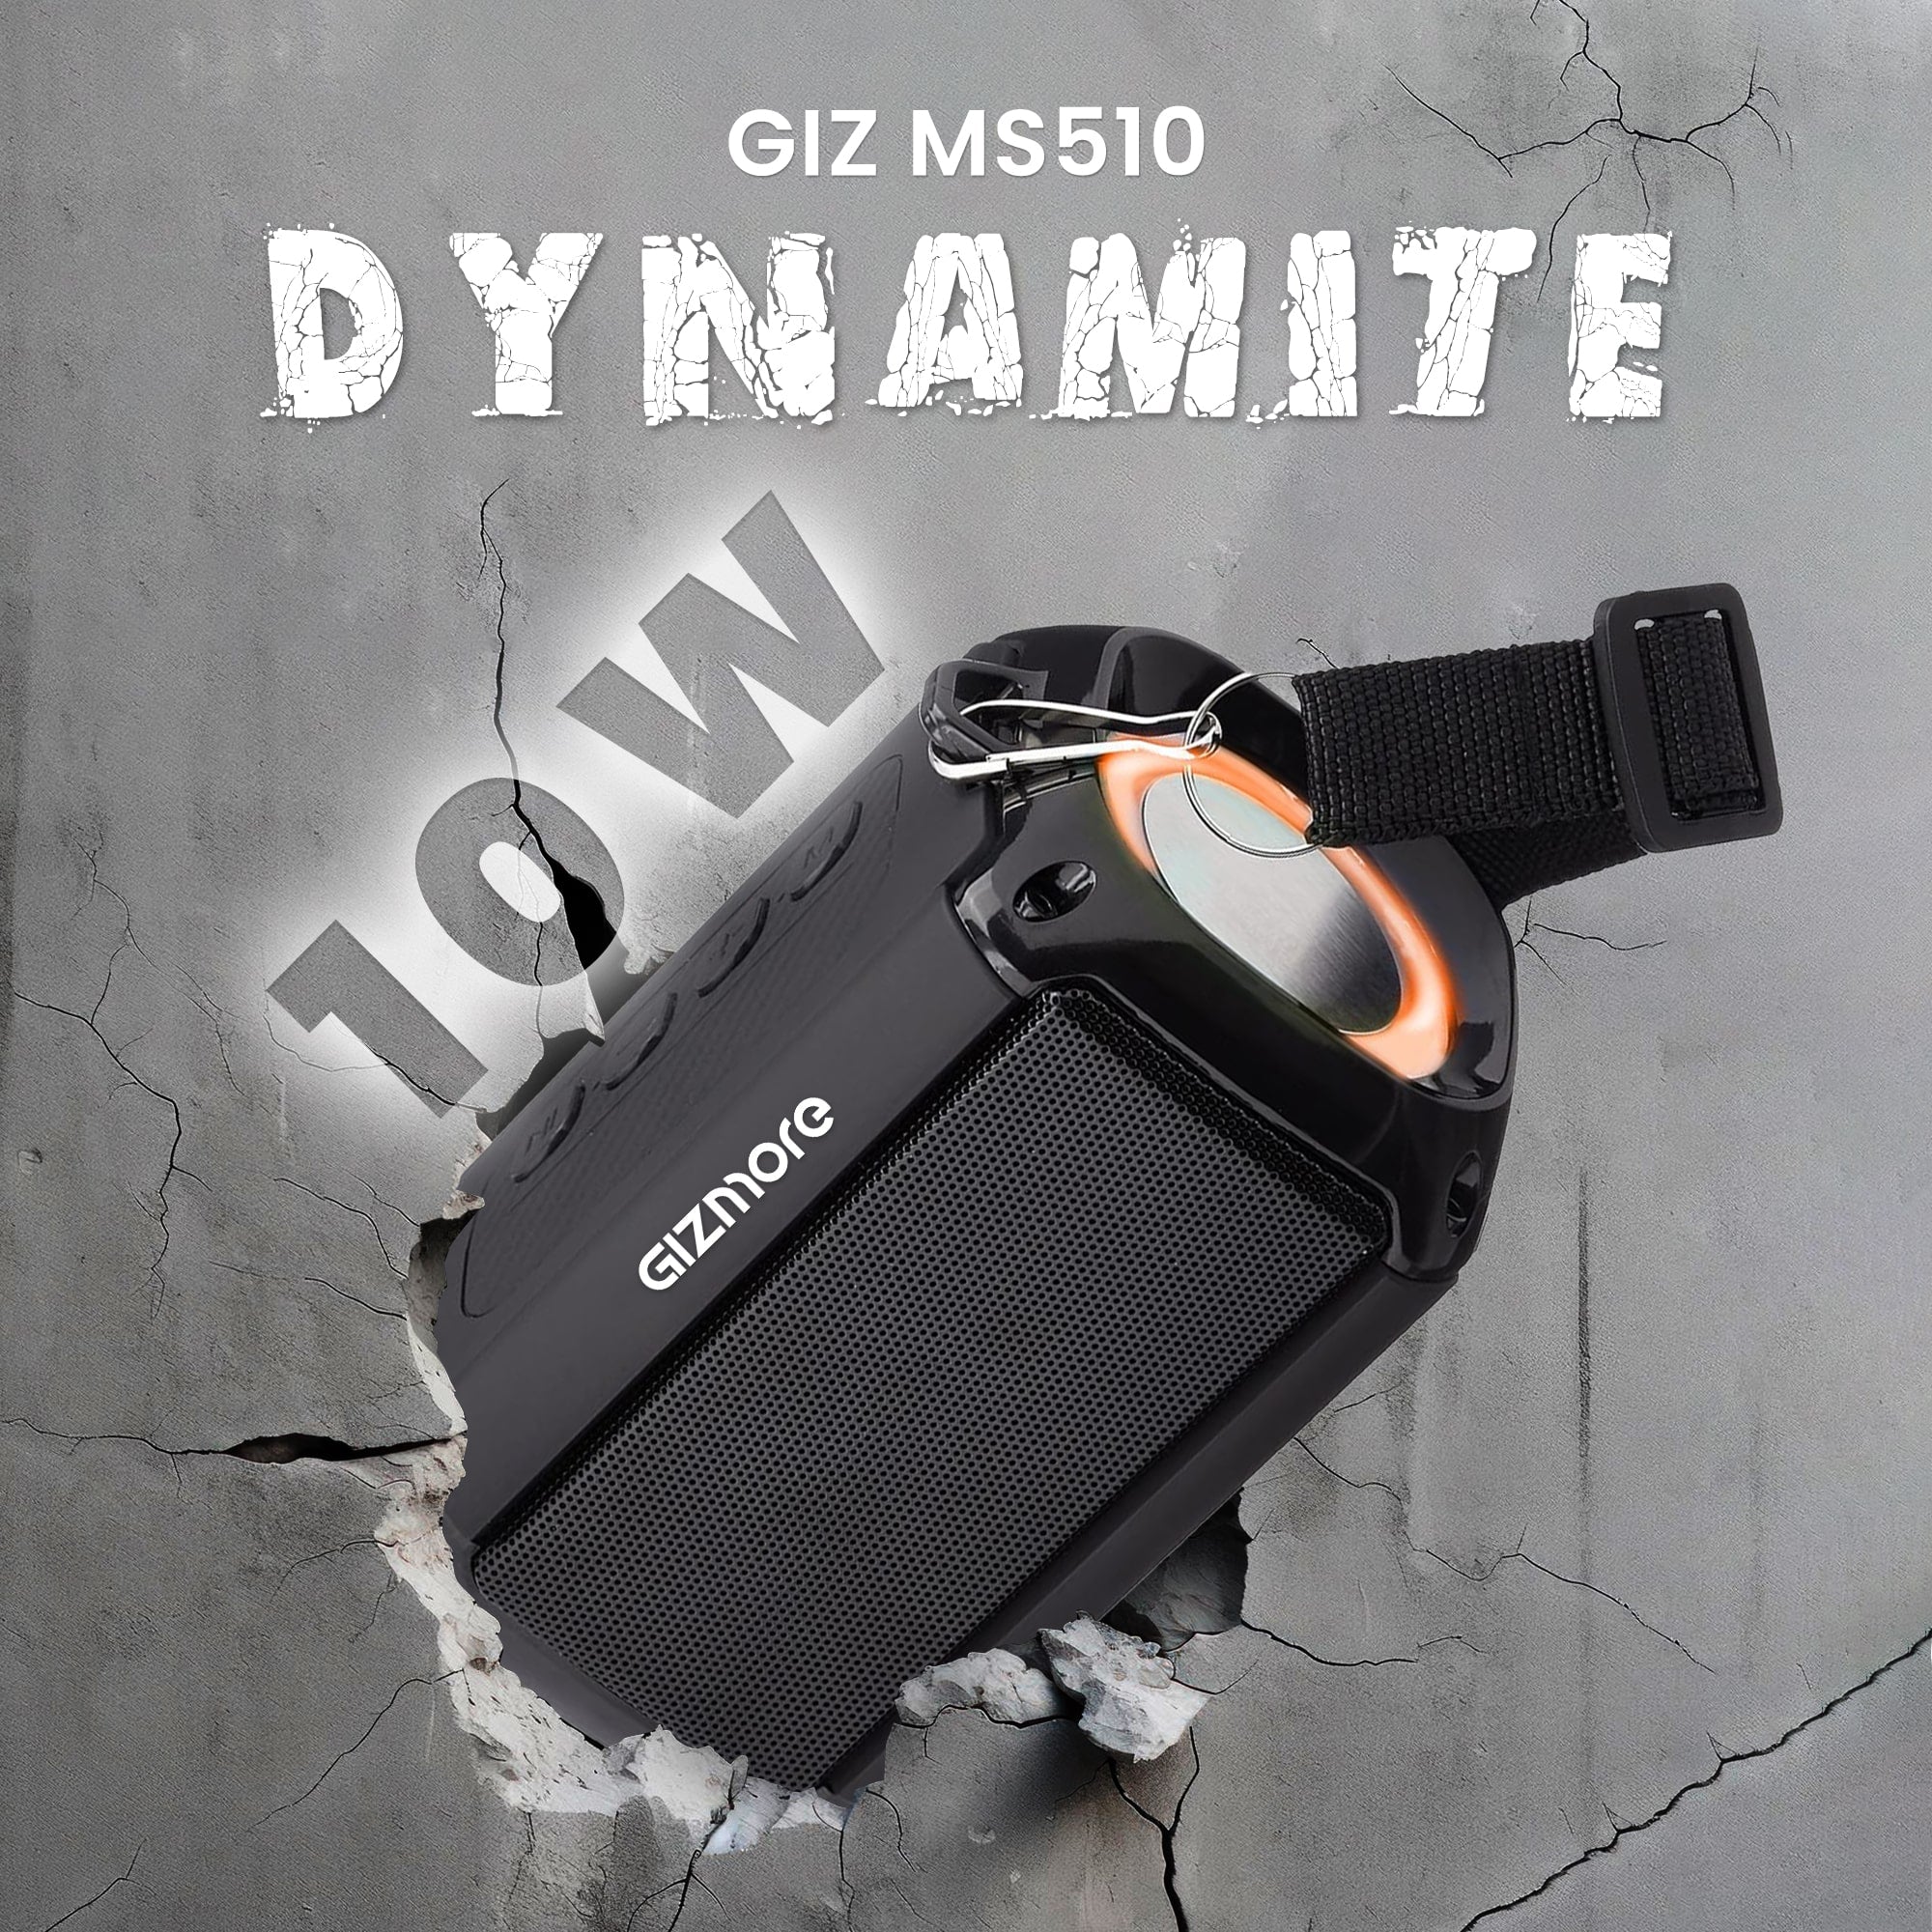 GIZMORE MS510 DYNAMITE 10W BT Speaker, 14 Hrs Playtime with TWS Function, RGB Lights, Dynamic Bass, Rubber Finish, Multiple Connectivity (BT, AUX, USB, SD Card), Volume Control and Noise Cancelling Mic (Black)